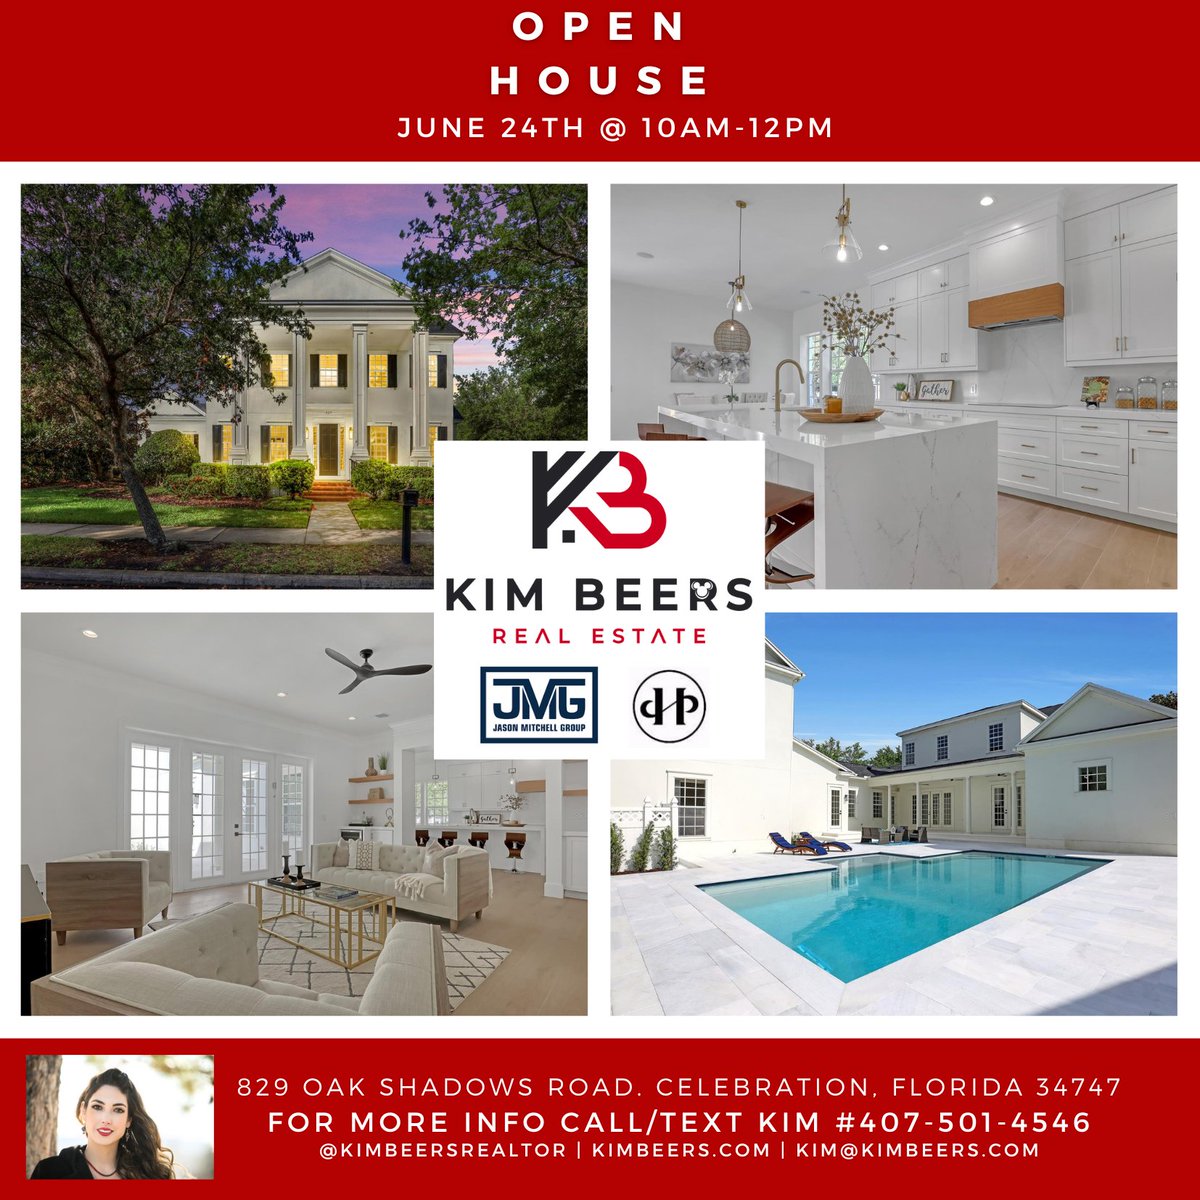 Ready to live the life of luxury? Preview this 💎 in person today from 10AM-12PM ✔️ 🌐 kimbeers.com #orlandohomesforsale #lifeofluxury #housegoals #backyardpool #lovewhereyoulive #floridahomes #furbabyfriendly #disneyrealestate #eatinkitchen #customhome #homeportrait